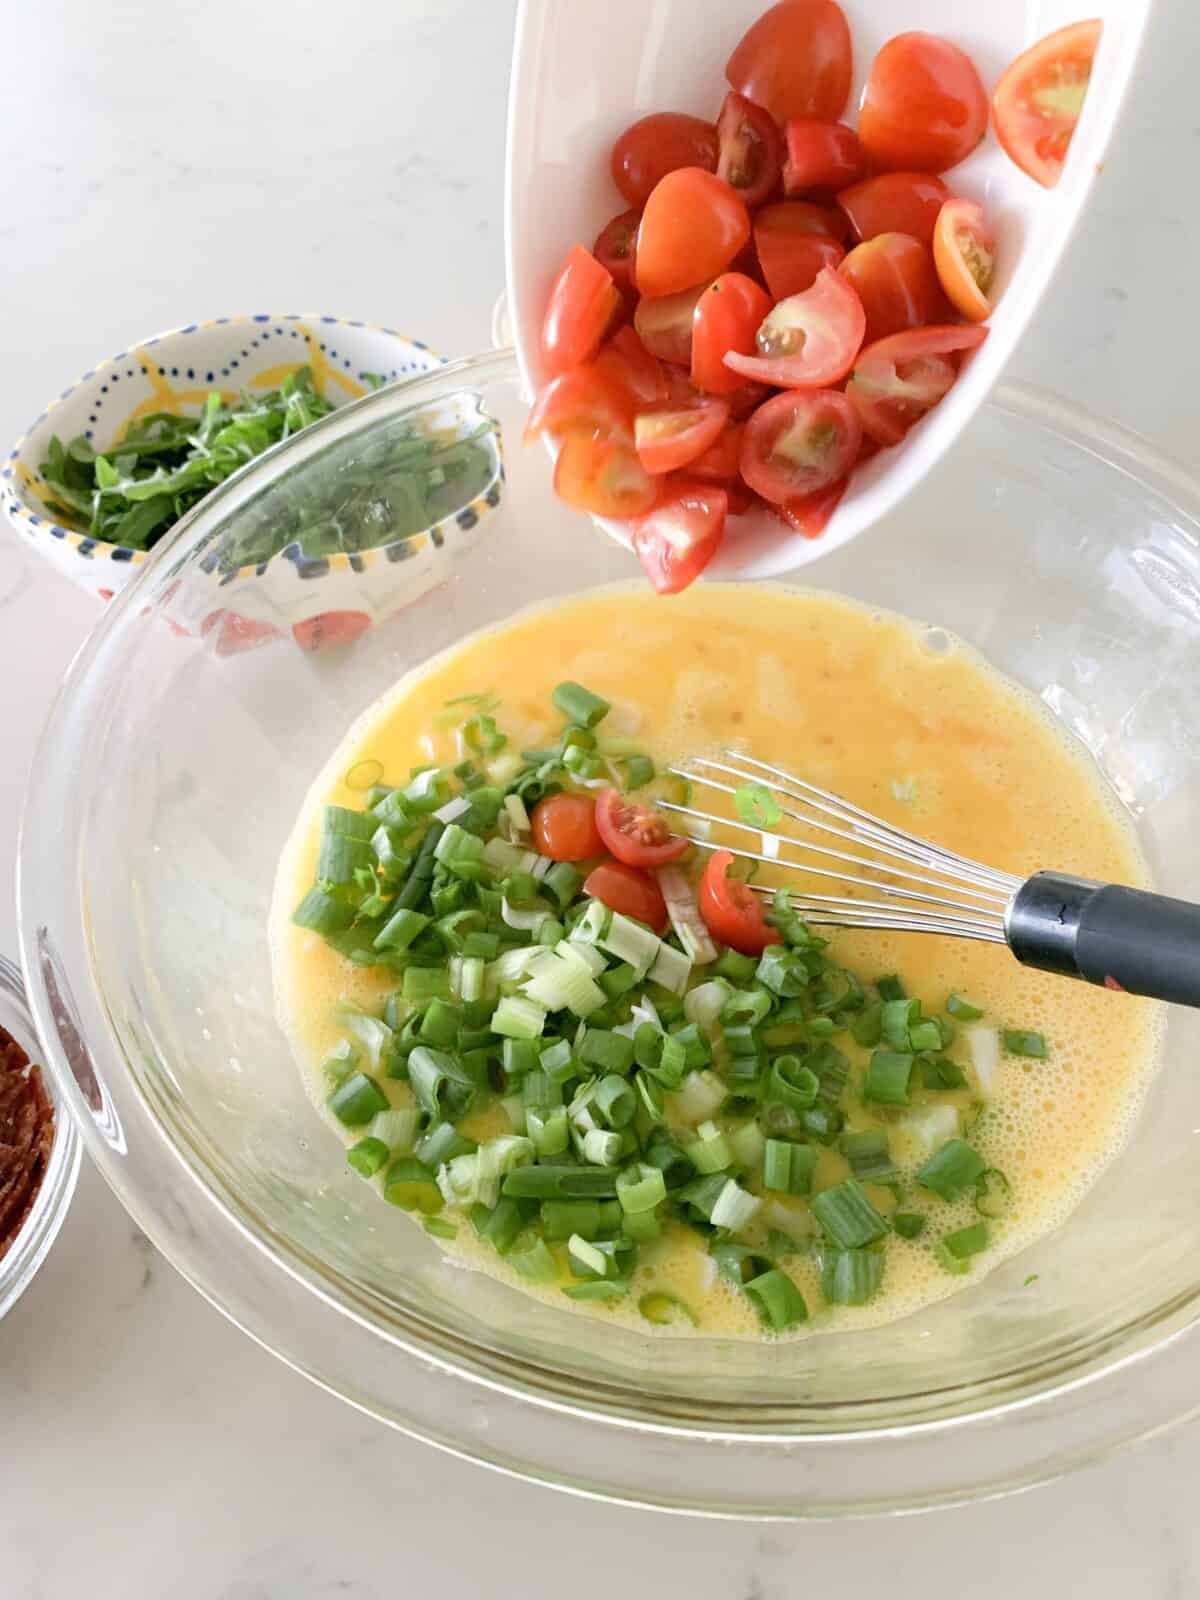 adding vegetables to bowl of eggs